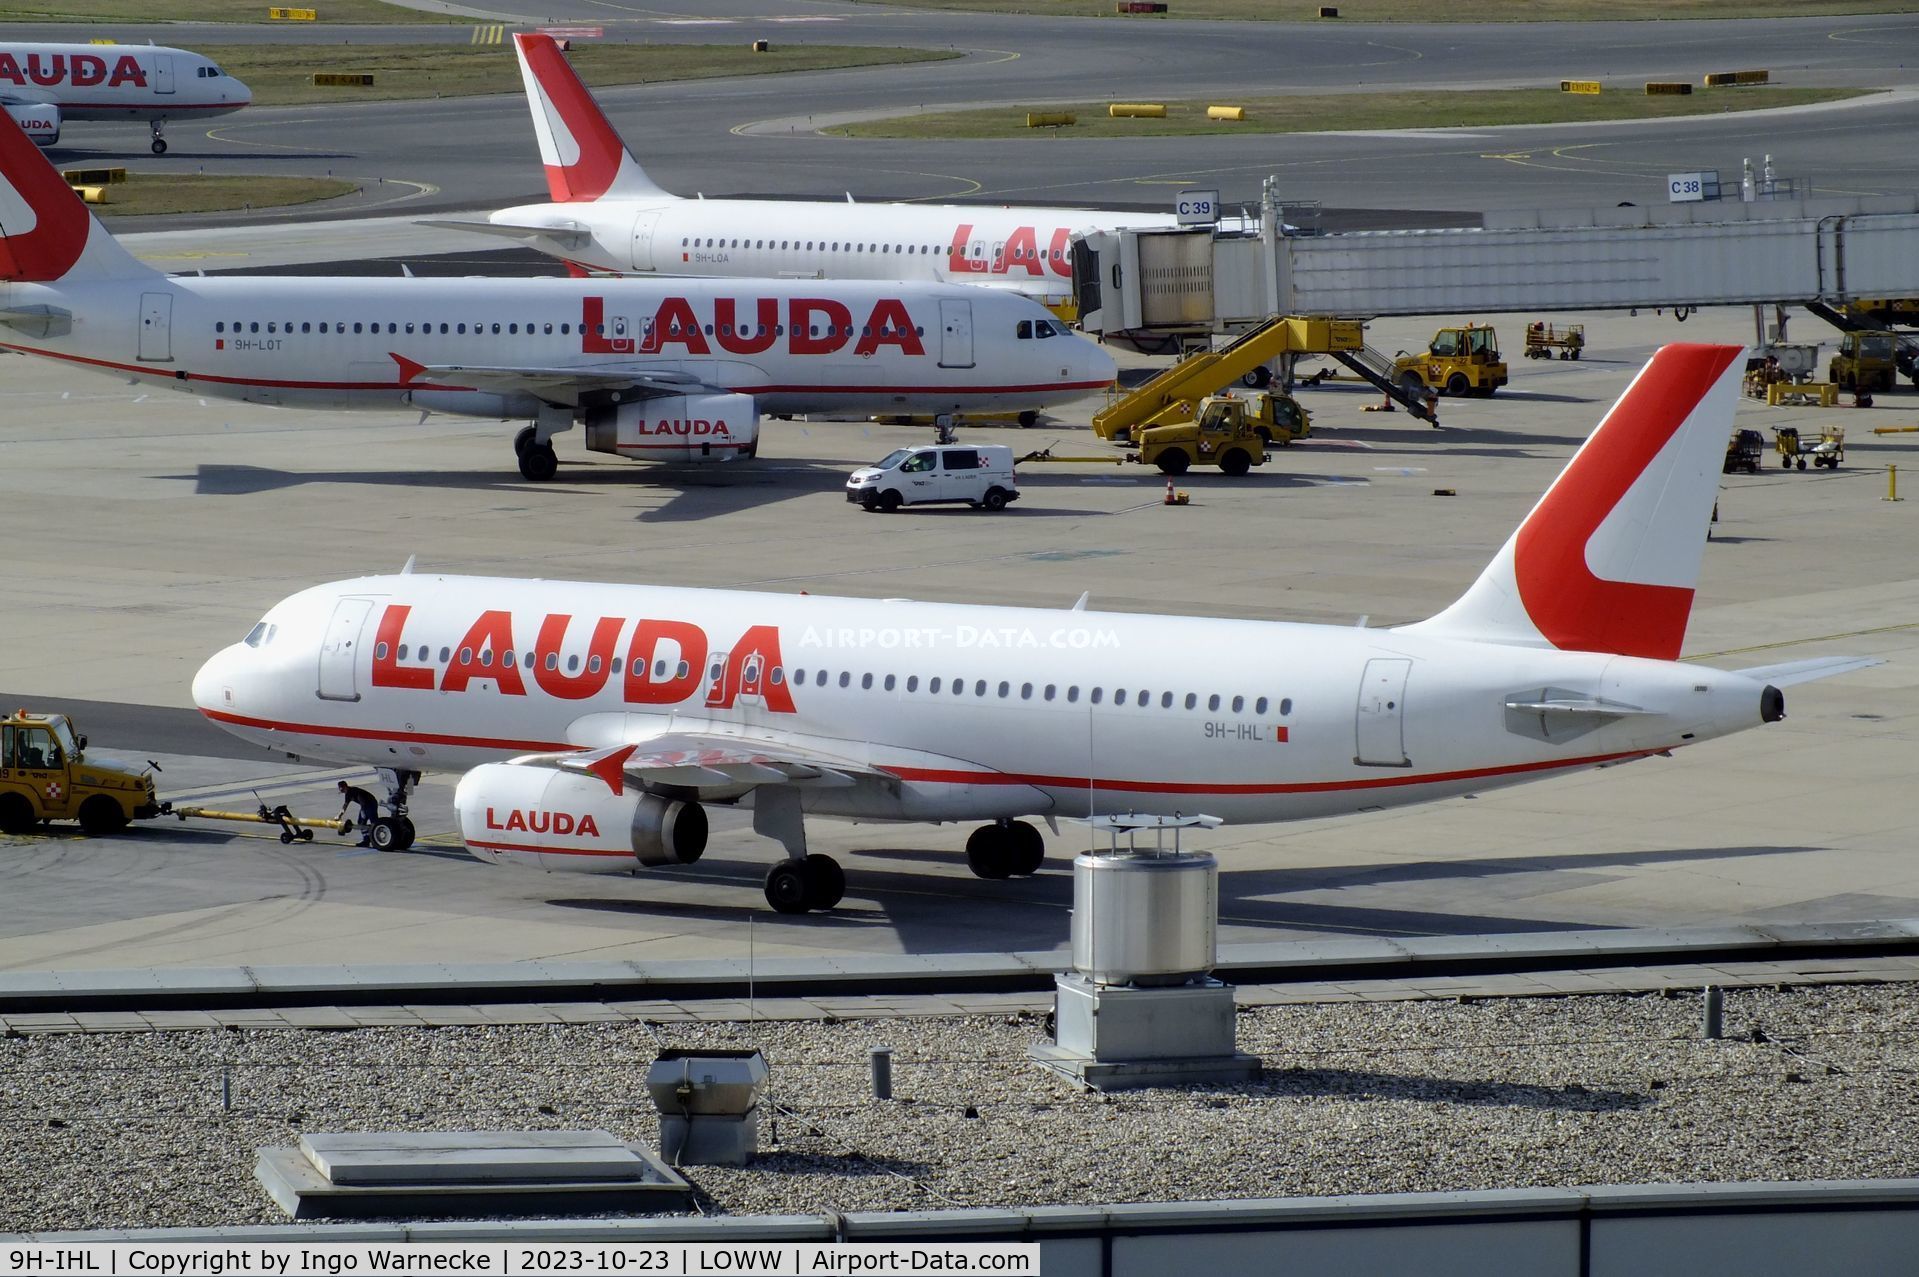 9H-IHL, 2007 Airbus A320-232 C/N 3105, Airbus A320-232 of Lauda Europe at Wien-Schwechat airport